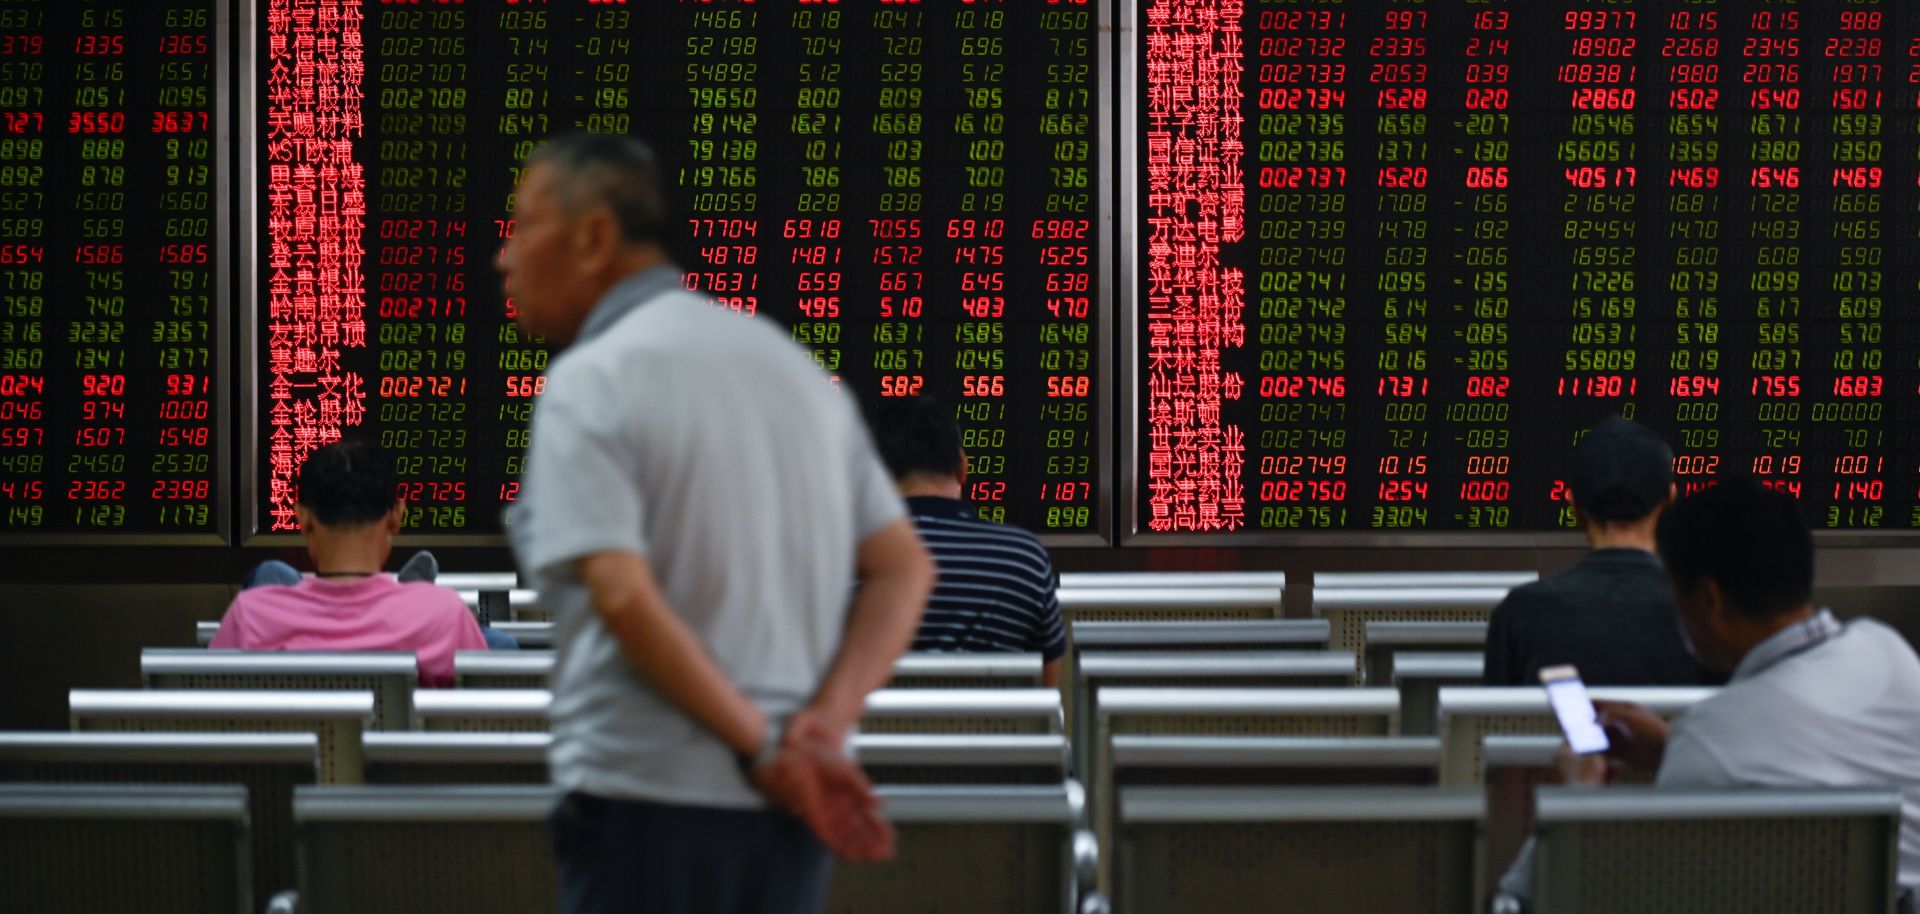 Chinese investors watch a stock ticker at a Beijing securities company on Aug. 26.